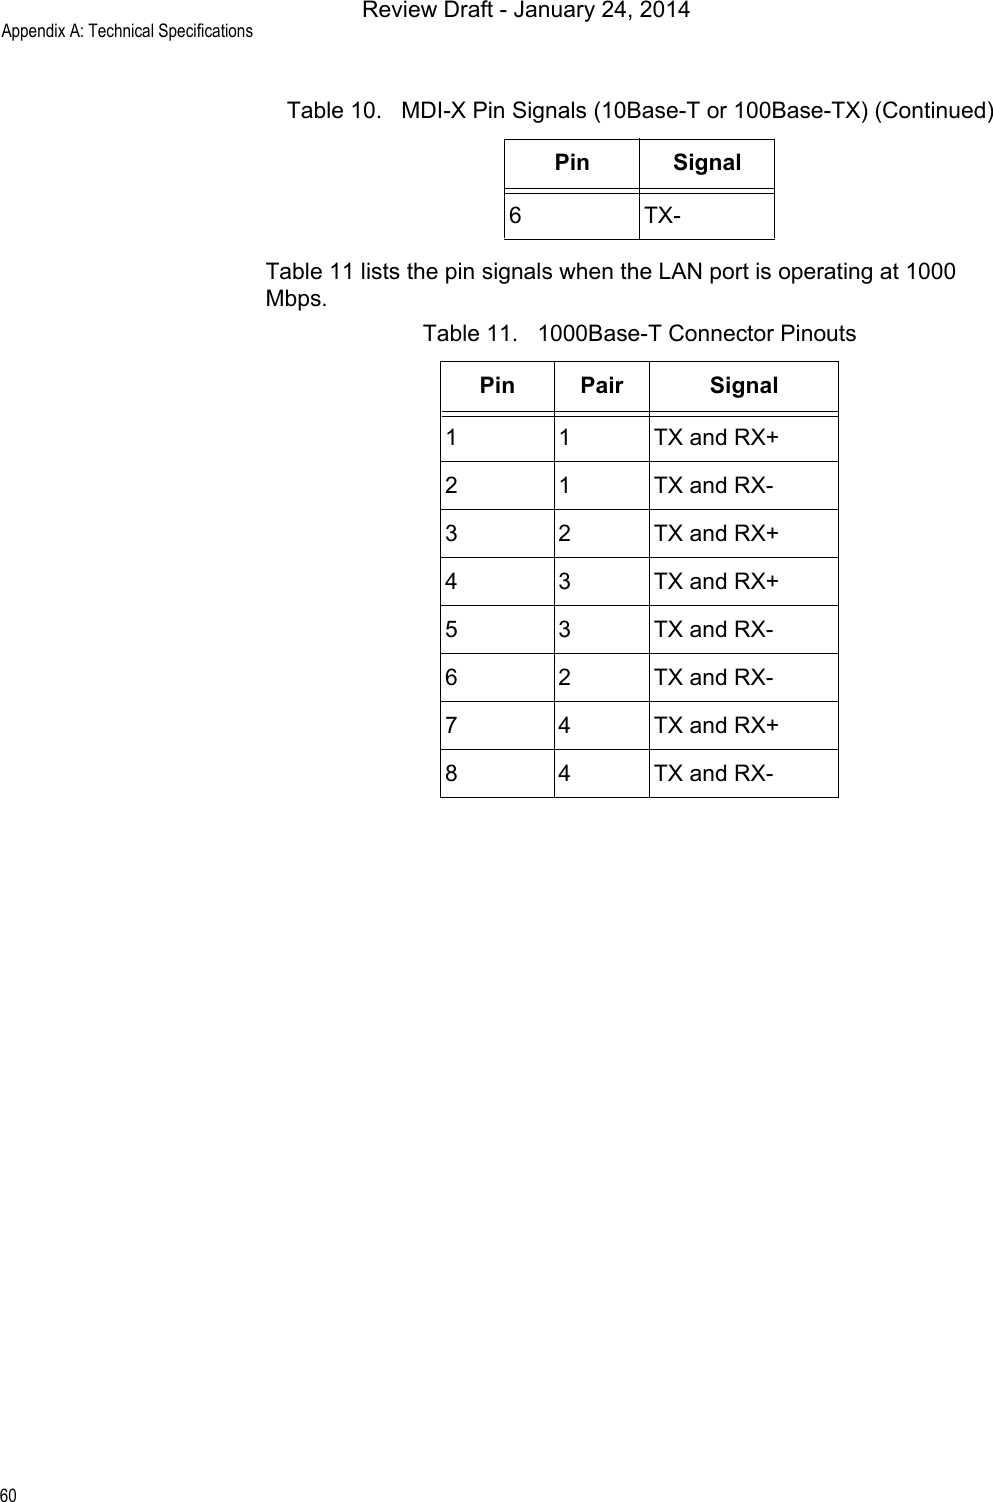 Appendix A: Technical Specifications60Table 11 lists the pin signals when the LAN port is operating at 1000 Mbps.6TX-Table 11.   1000Base-T Connector PinoutsPin Pair Signal1 1 TX and RX+2 1 TX and RX-3 2 TX and RX+4 3 TX and RX+5 3 TX and RX-6 2 TX and RX-7 4 TX and RX+8 4 TX and RX-Table 10.   MDI-X Pin Signals (10Base-T or 100Base-TX) (Continued)Pin SignalReview Draft - January 24, 2014